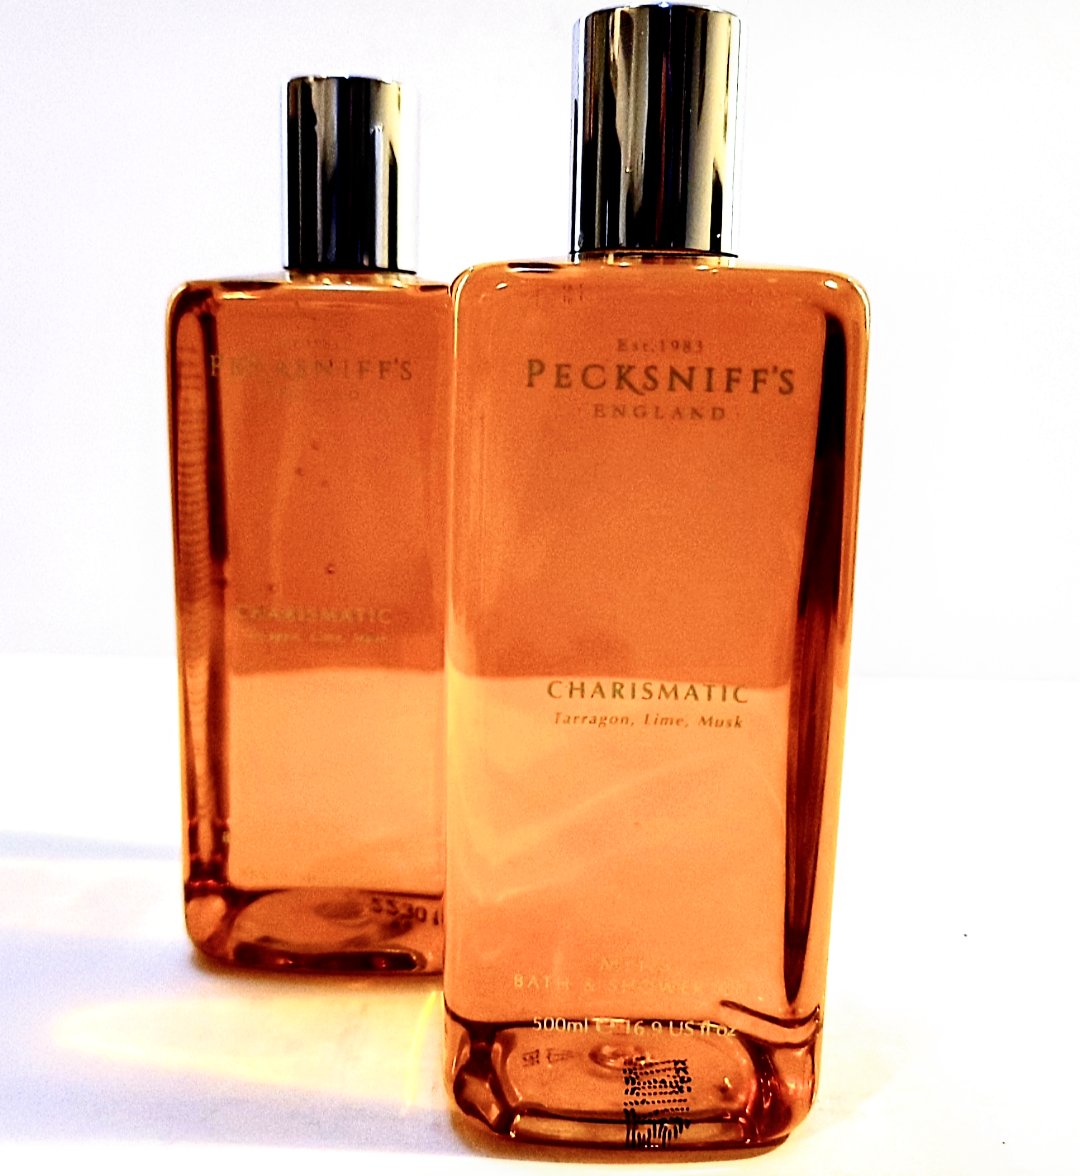 Two bottles of Pecksniffs Charismatic Mens Bath & Shower Gel, 500ml on a white surface.